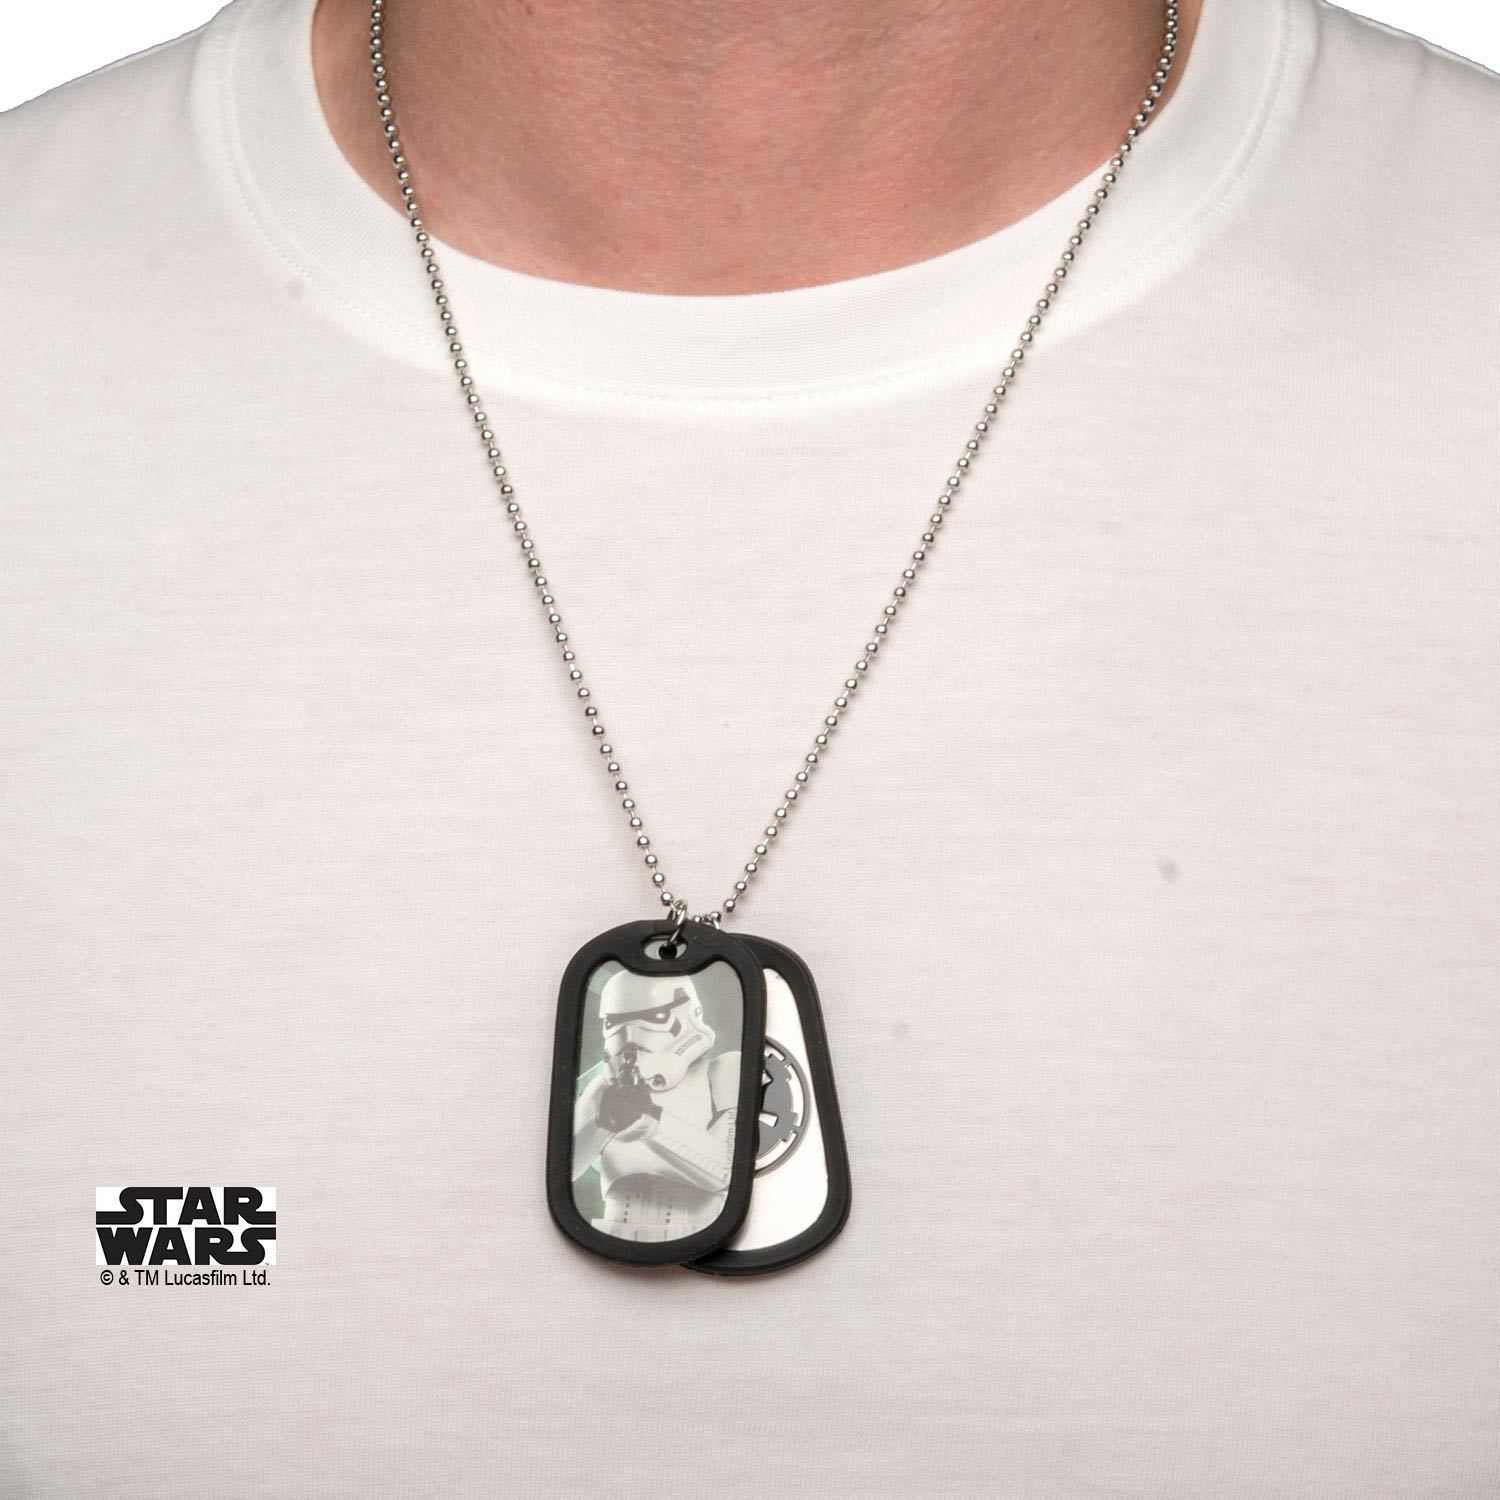 Star Wars Storm Trooper Rubber Silencer Double Dog Tag Pendant Necklace